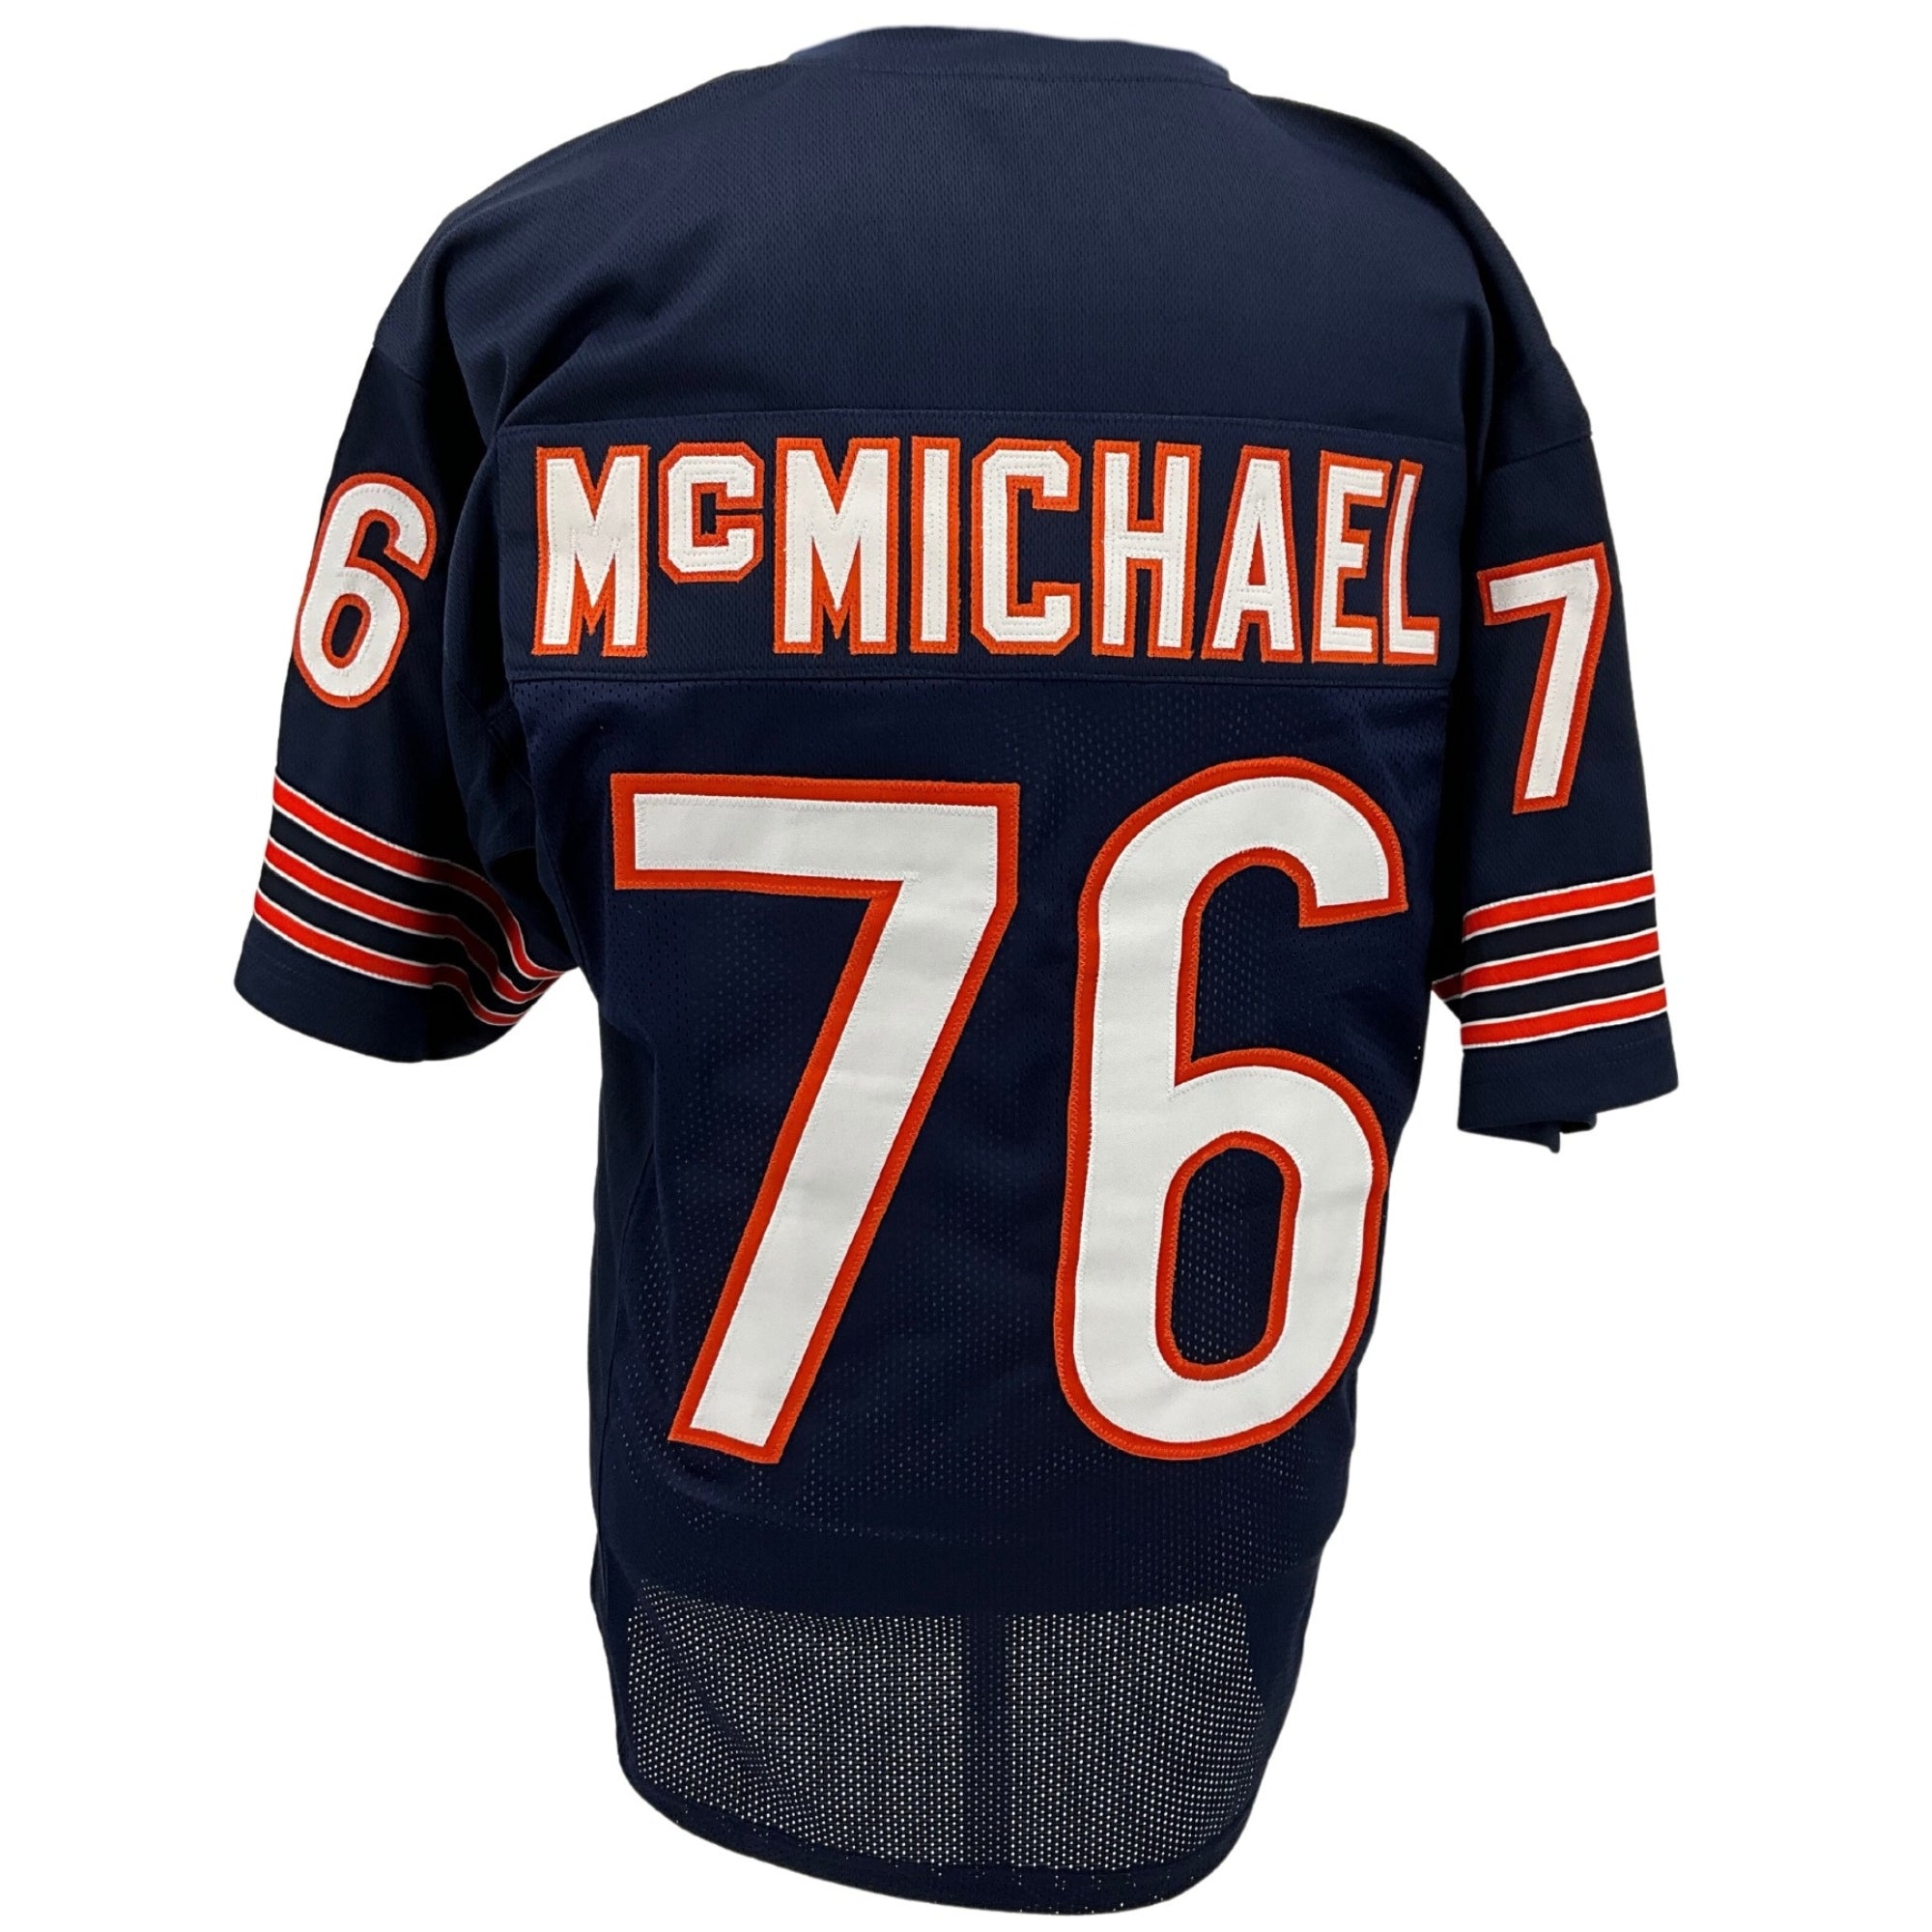 STEVE McMICHAEL Chicago Bears BLUE Jersey M-5XL Unsigned Custom Sewn Stitched